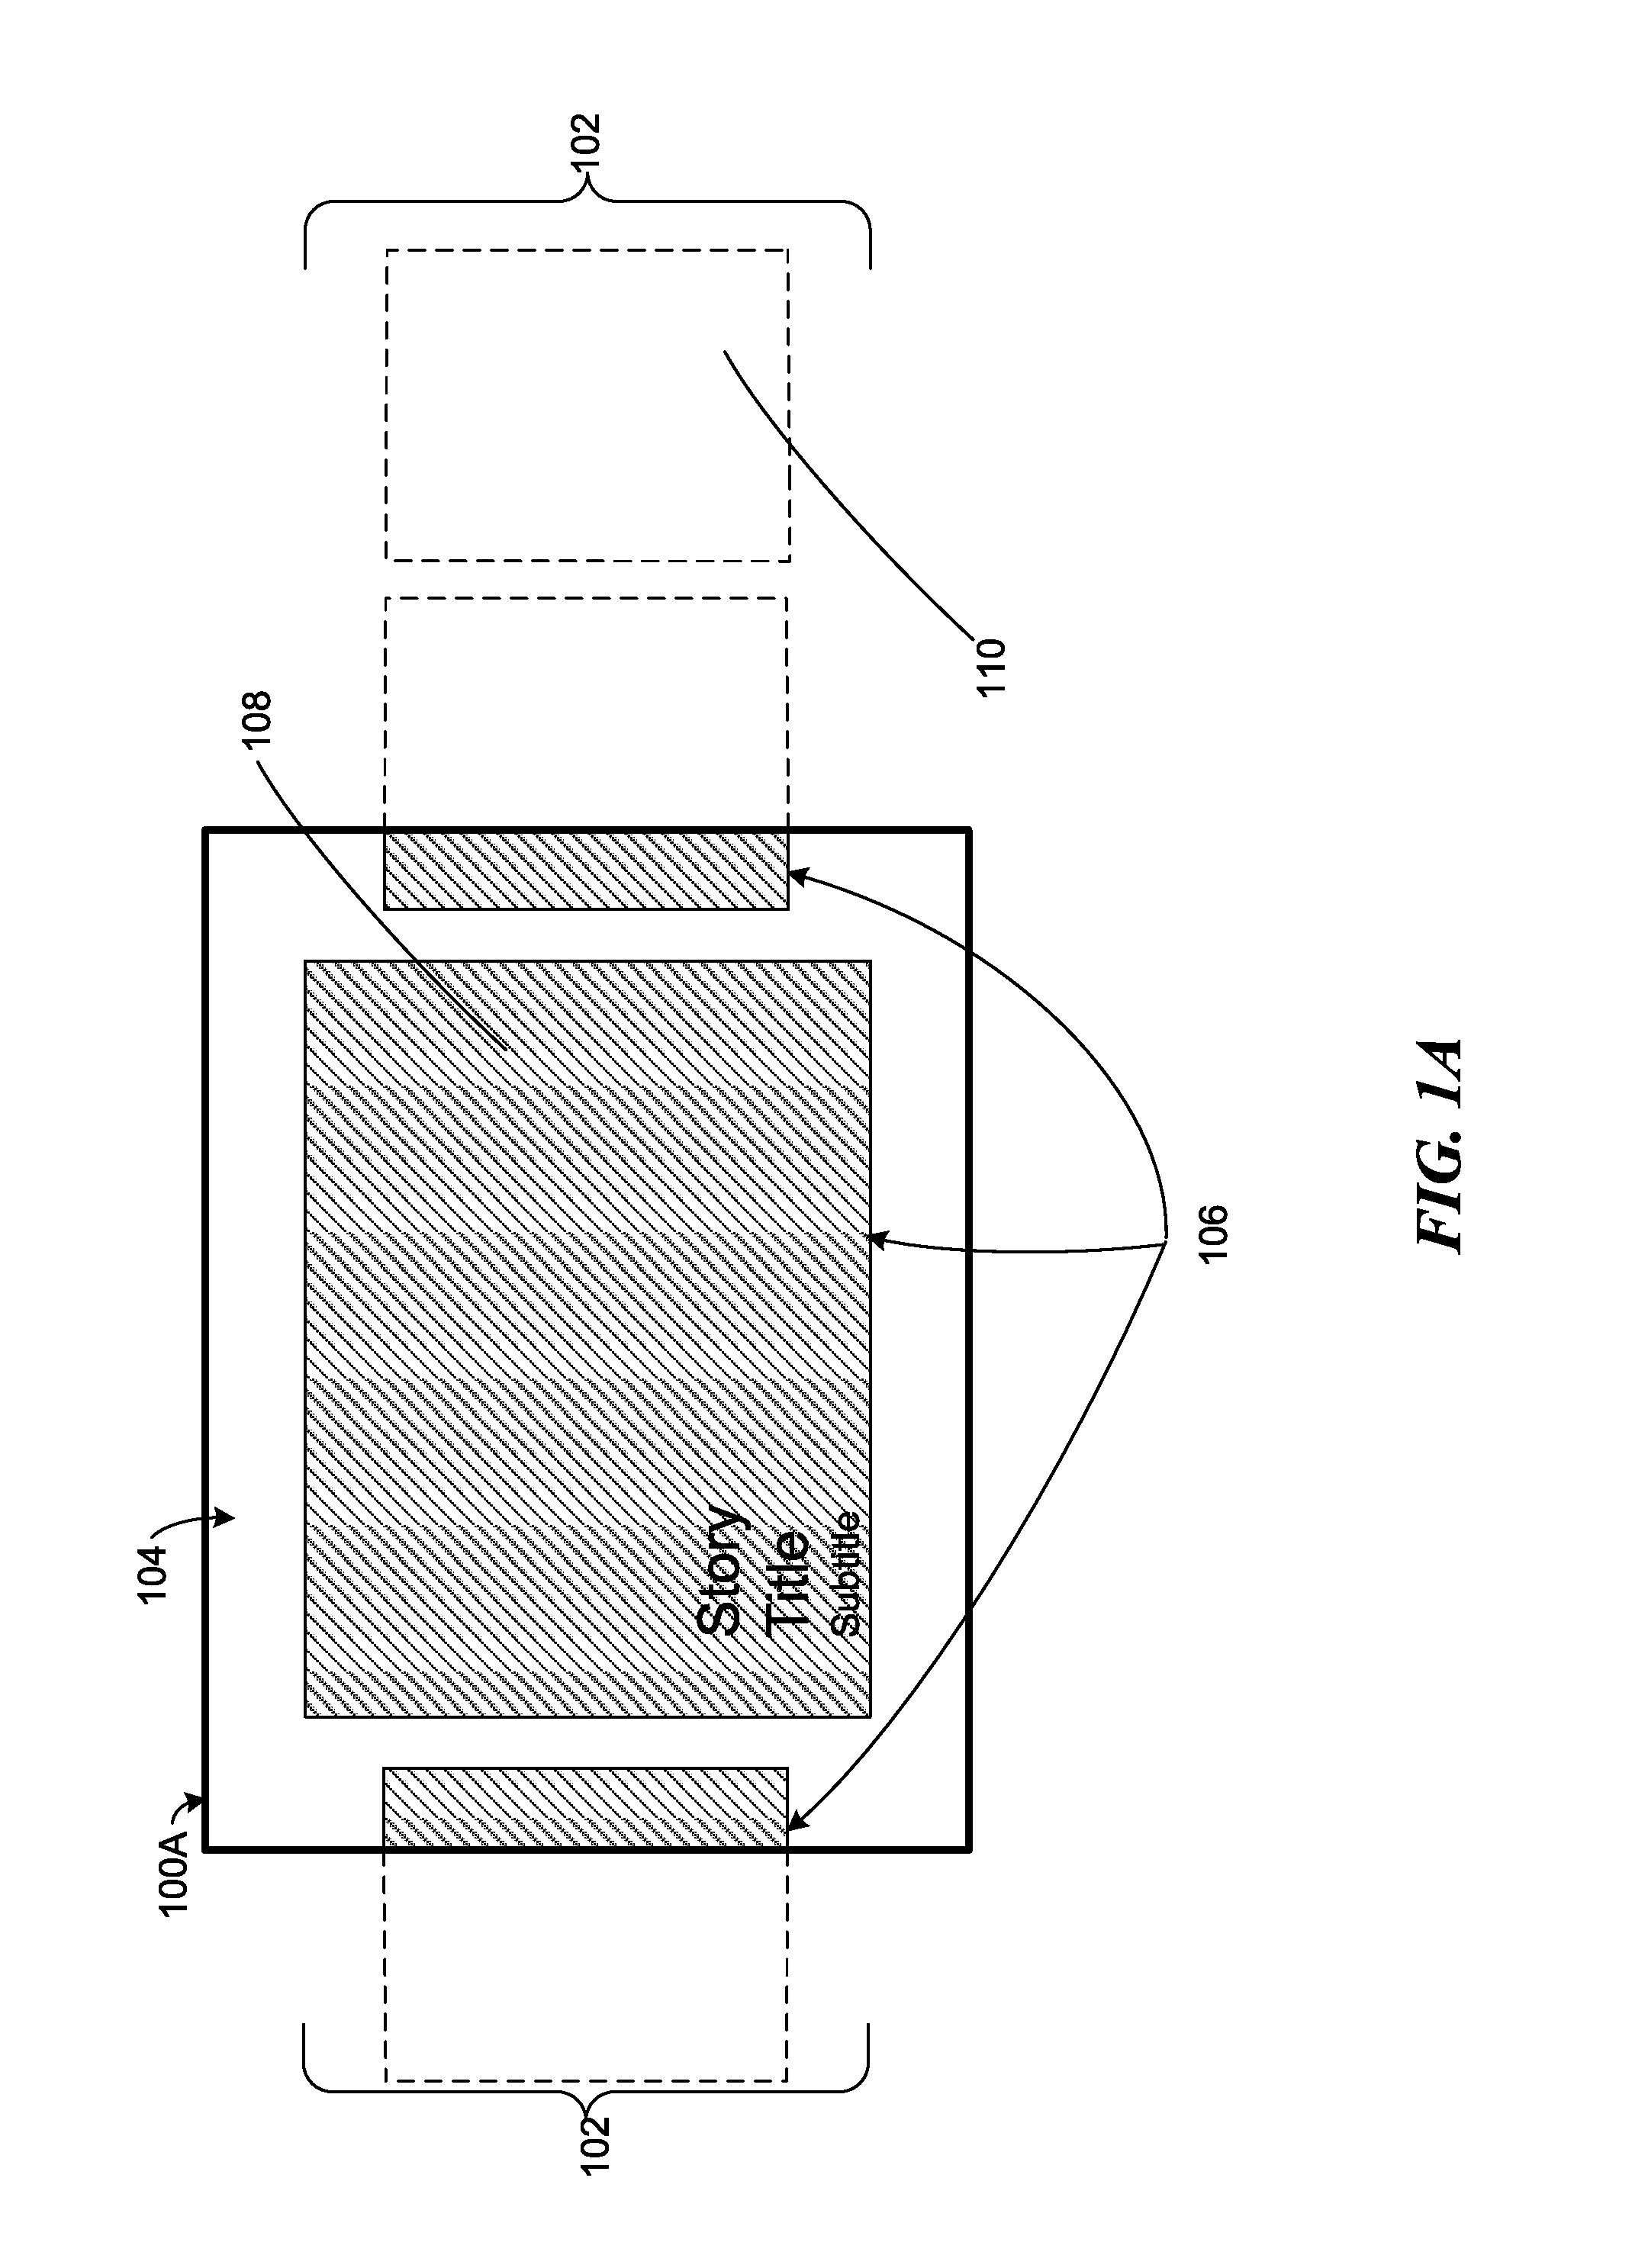 Content navigation structure and transition mechanism